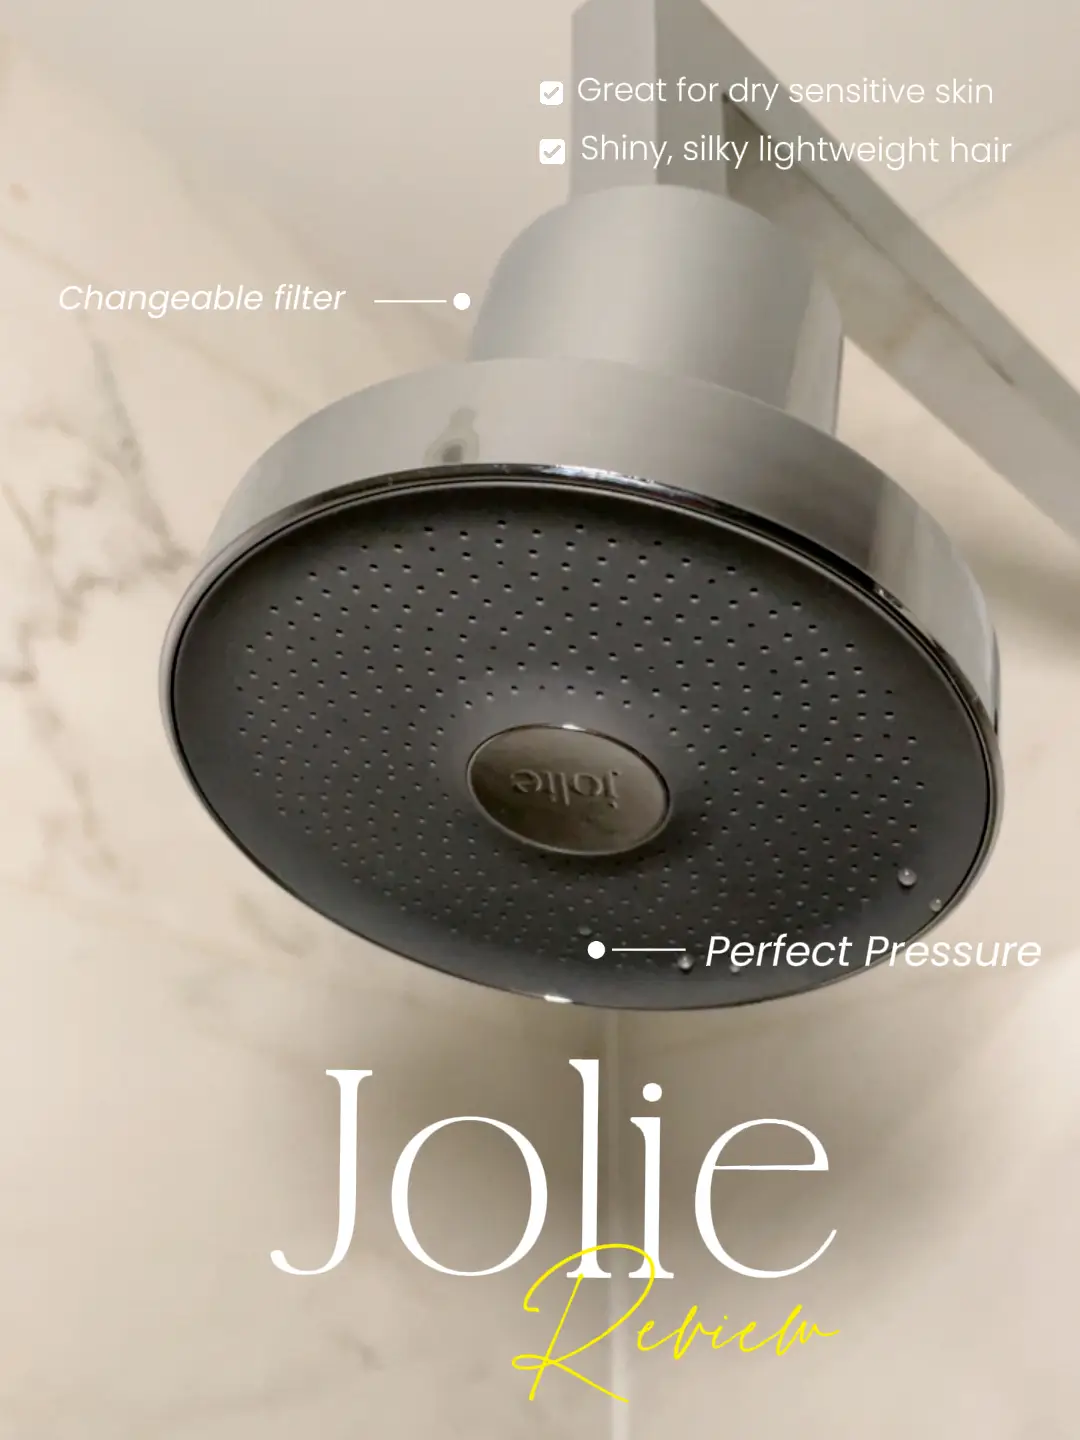 The Jolie shower head filter review